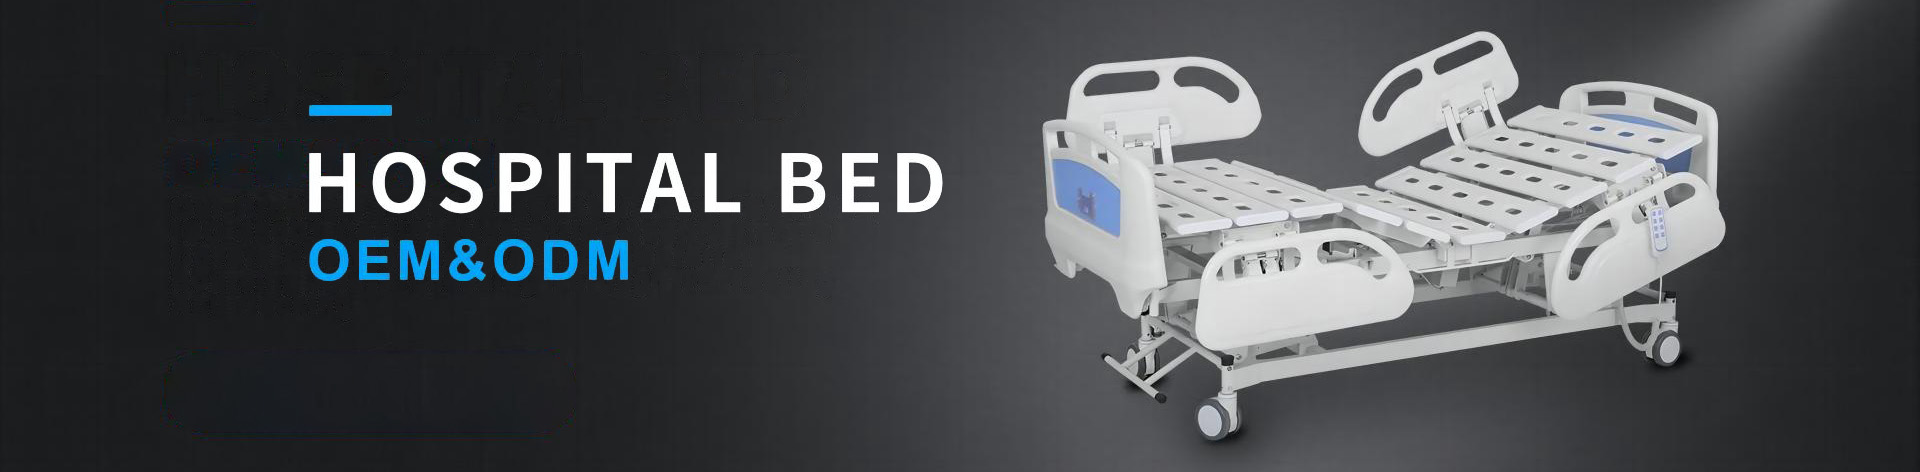 Products-HospitalBeds,Medicalbeds,ElectricBeds,FlatBeds,IcuBeds